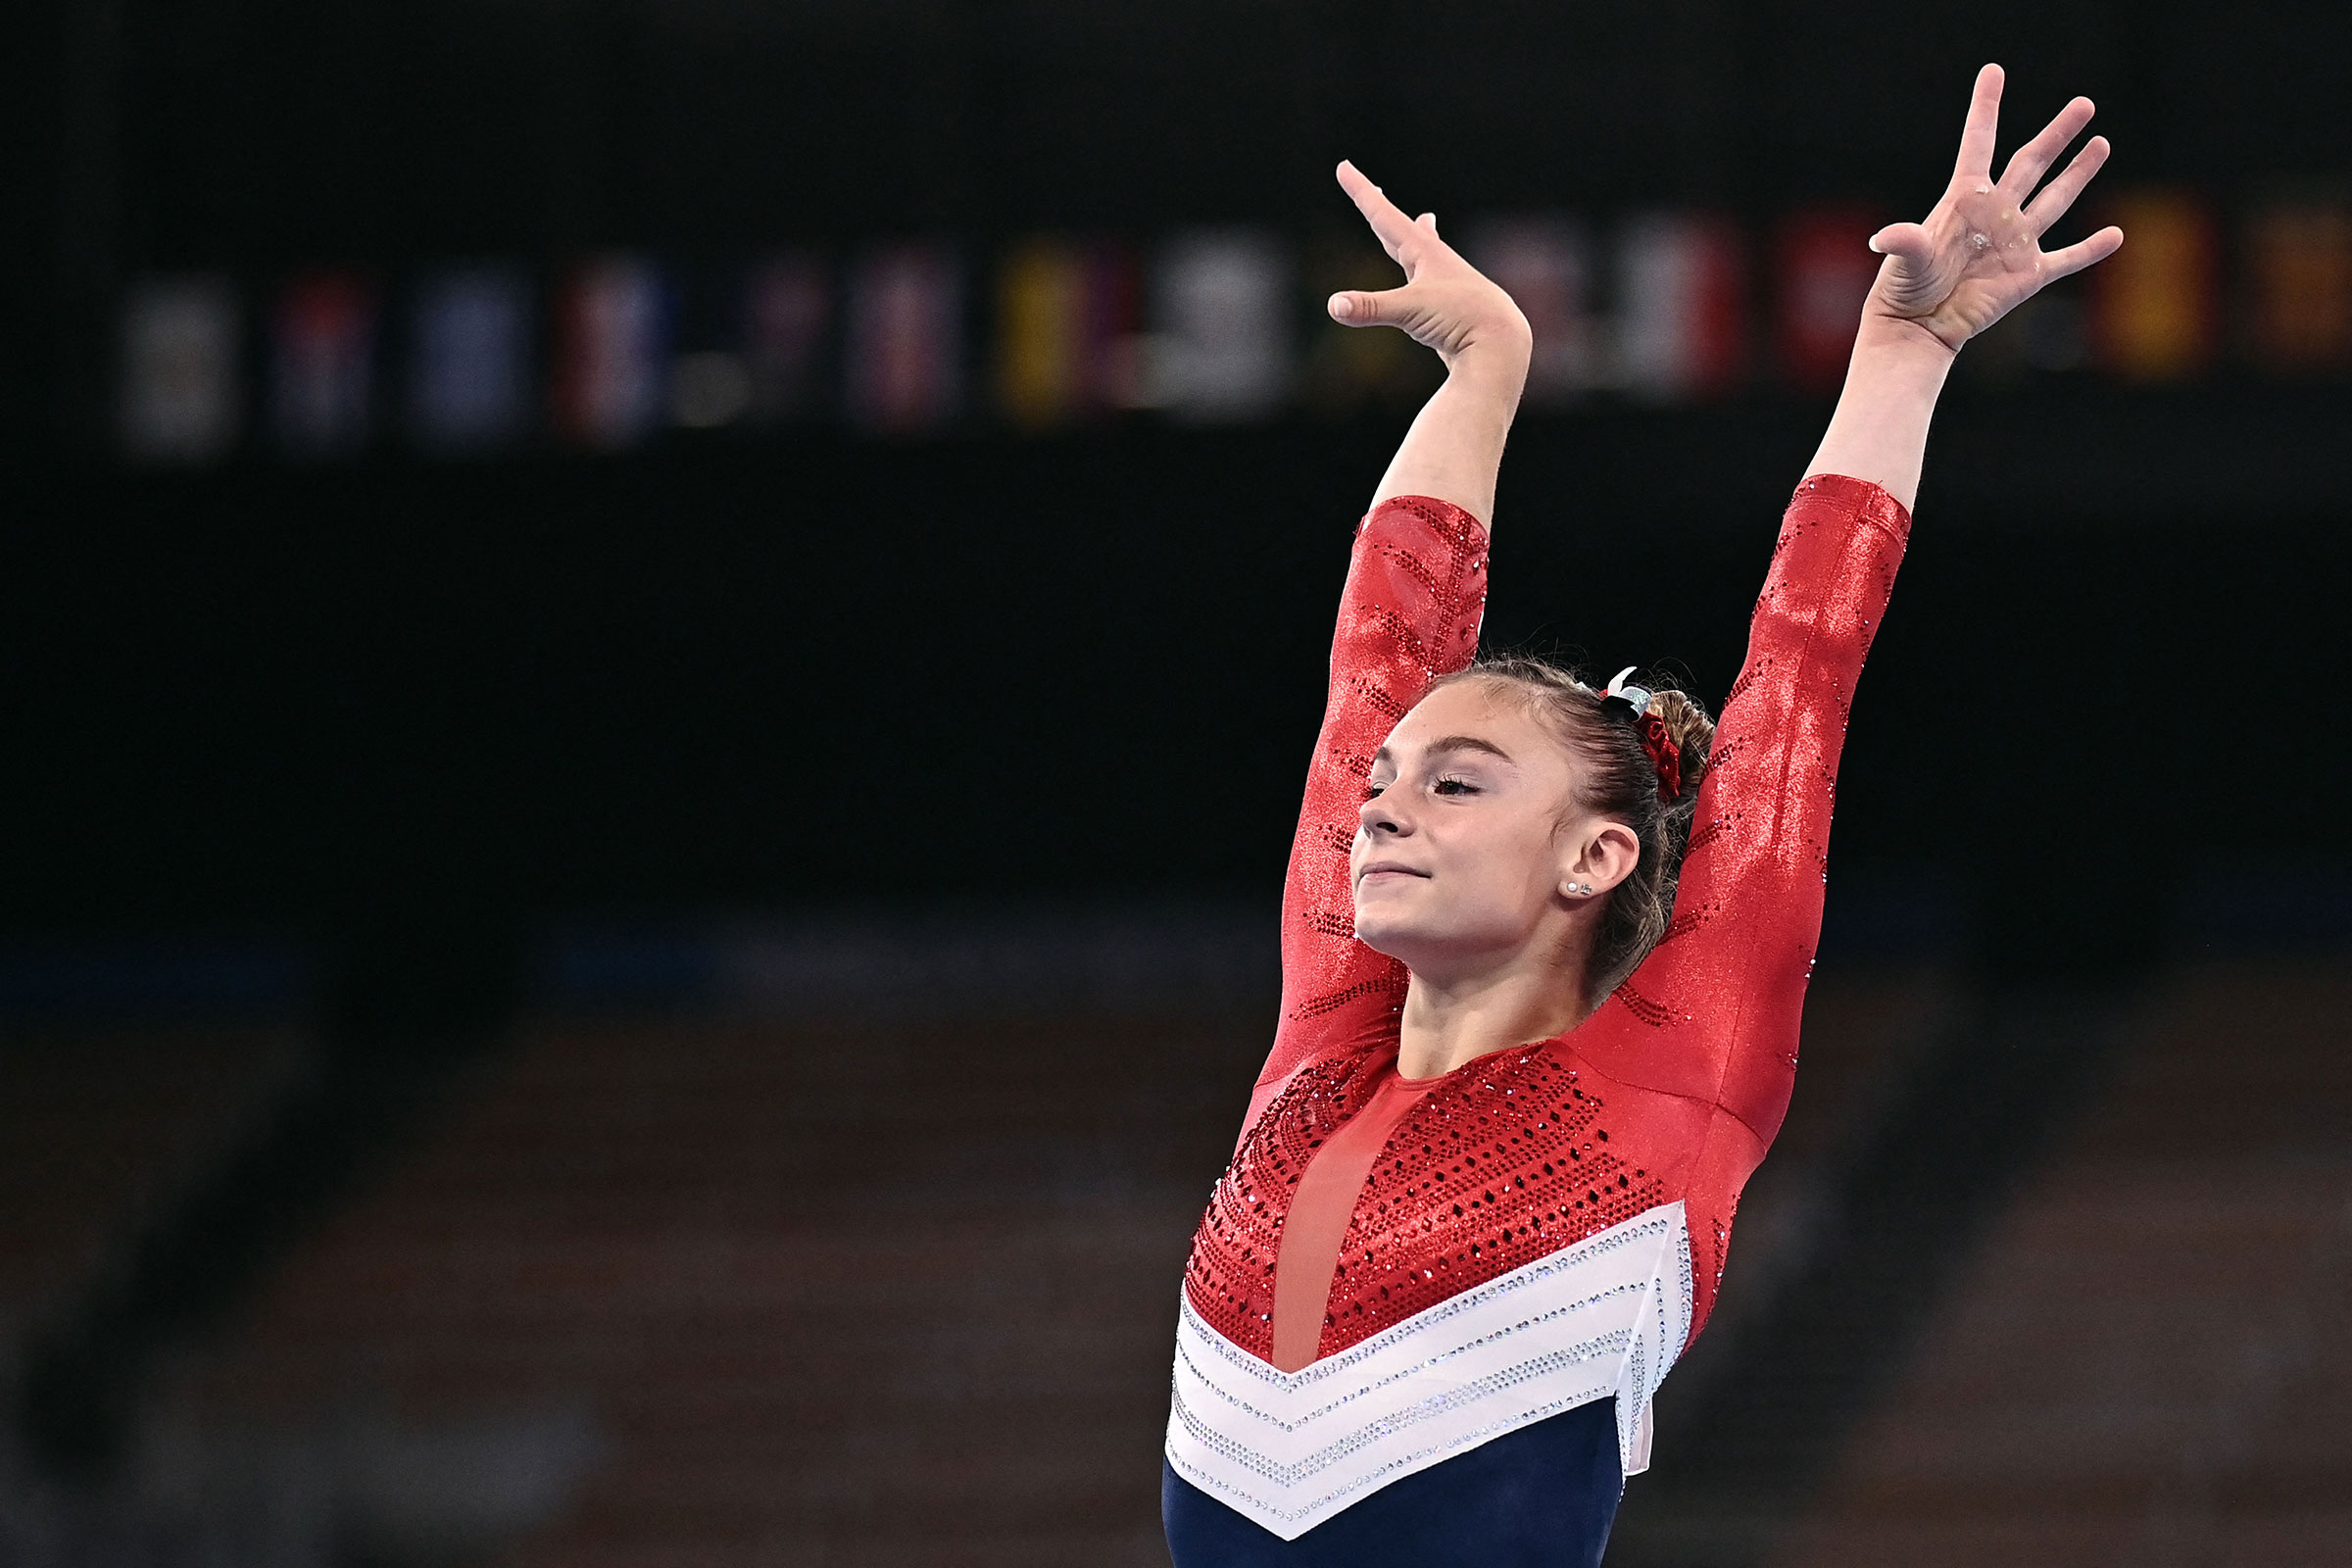 Grace McCallum competes in the balance beam event of the artistic gymnastics women's team final on July 27.